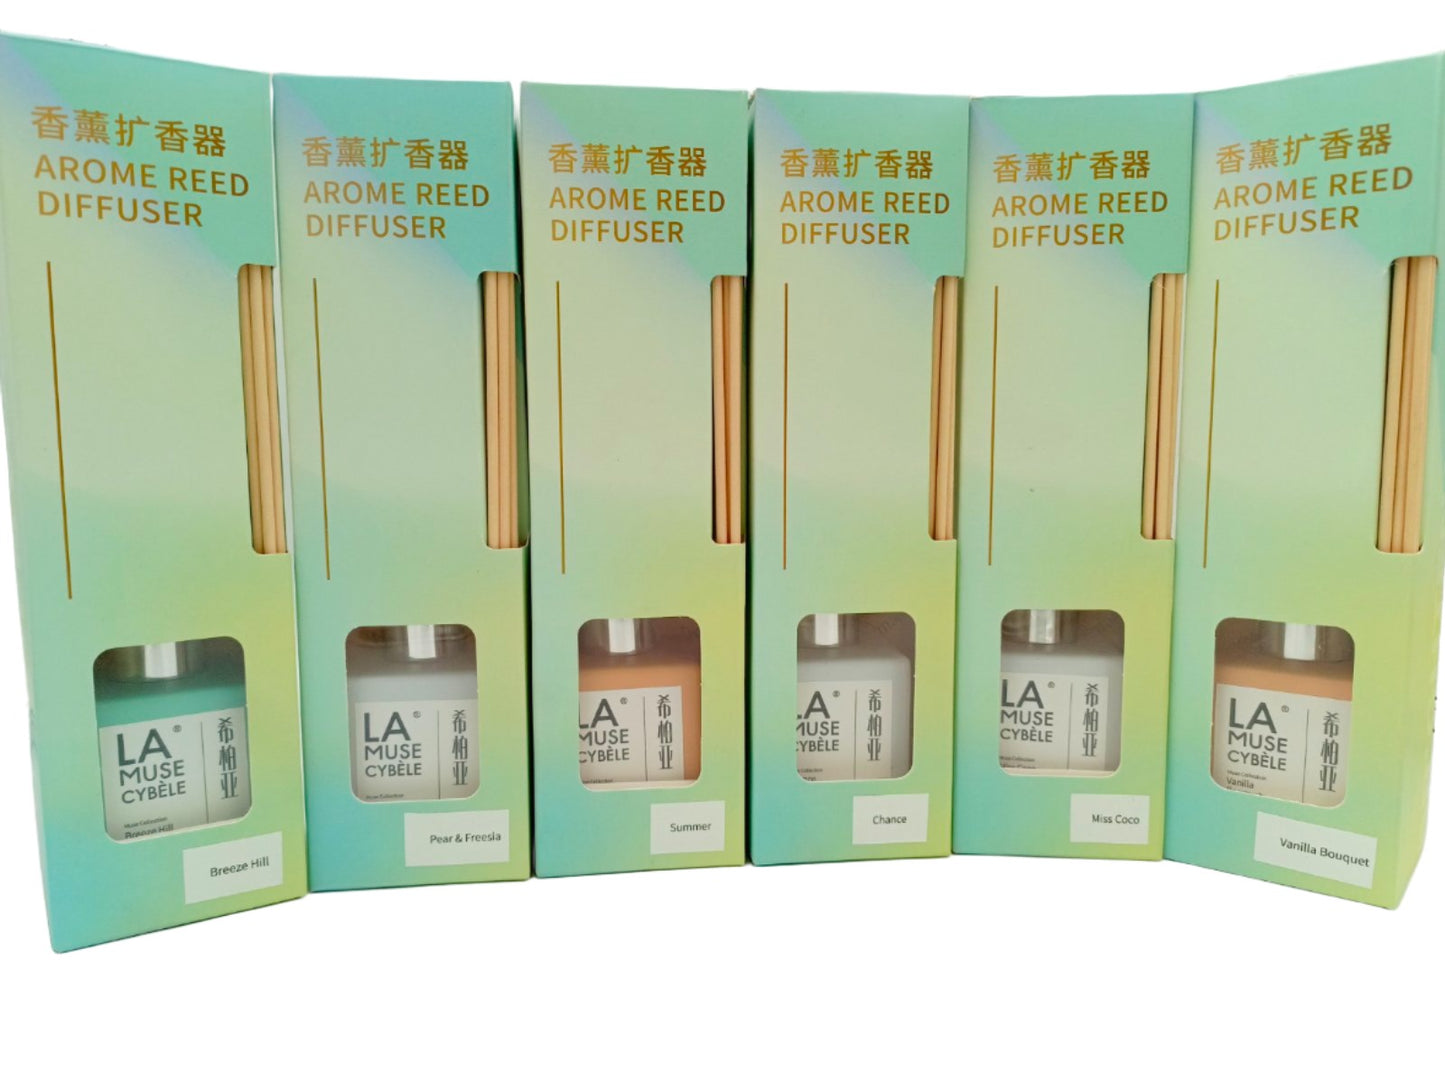 AROME REED DIFFUSER (50ML) BREEZE & HILL